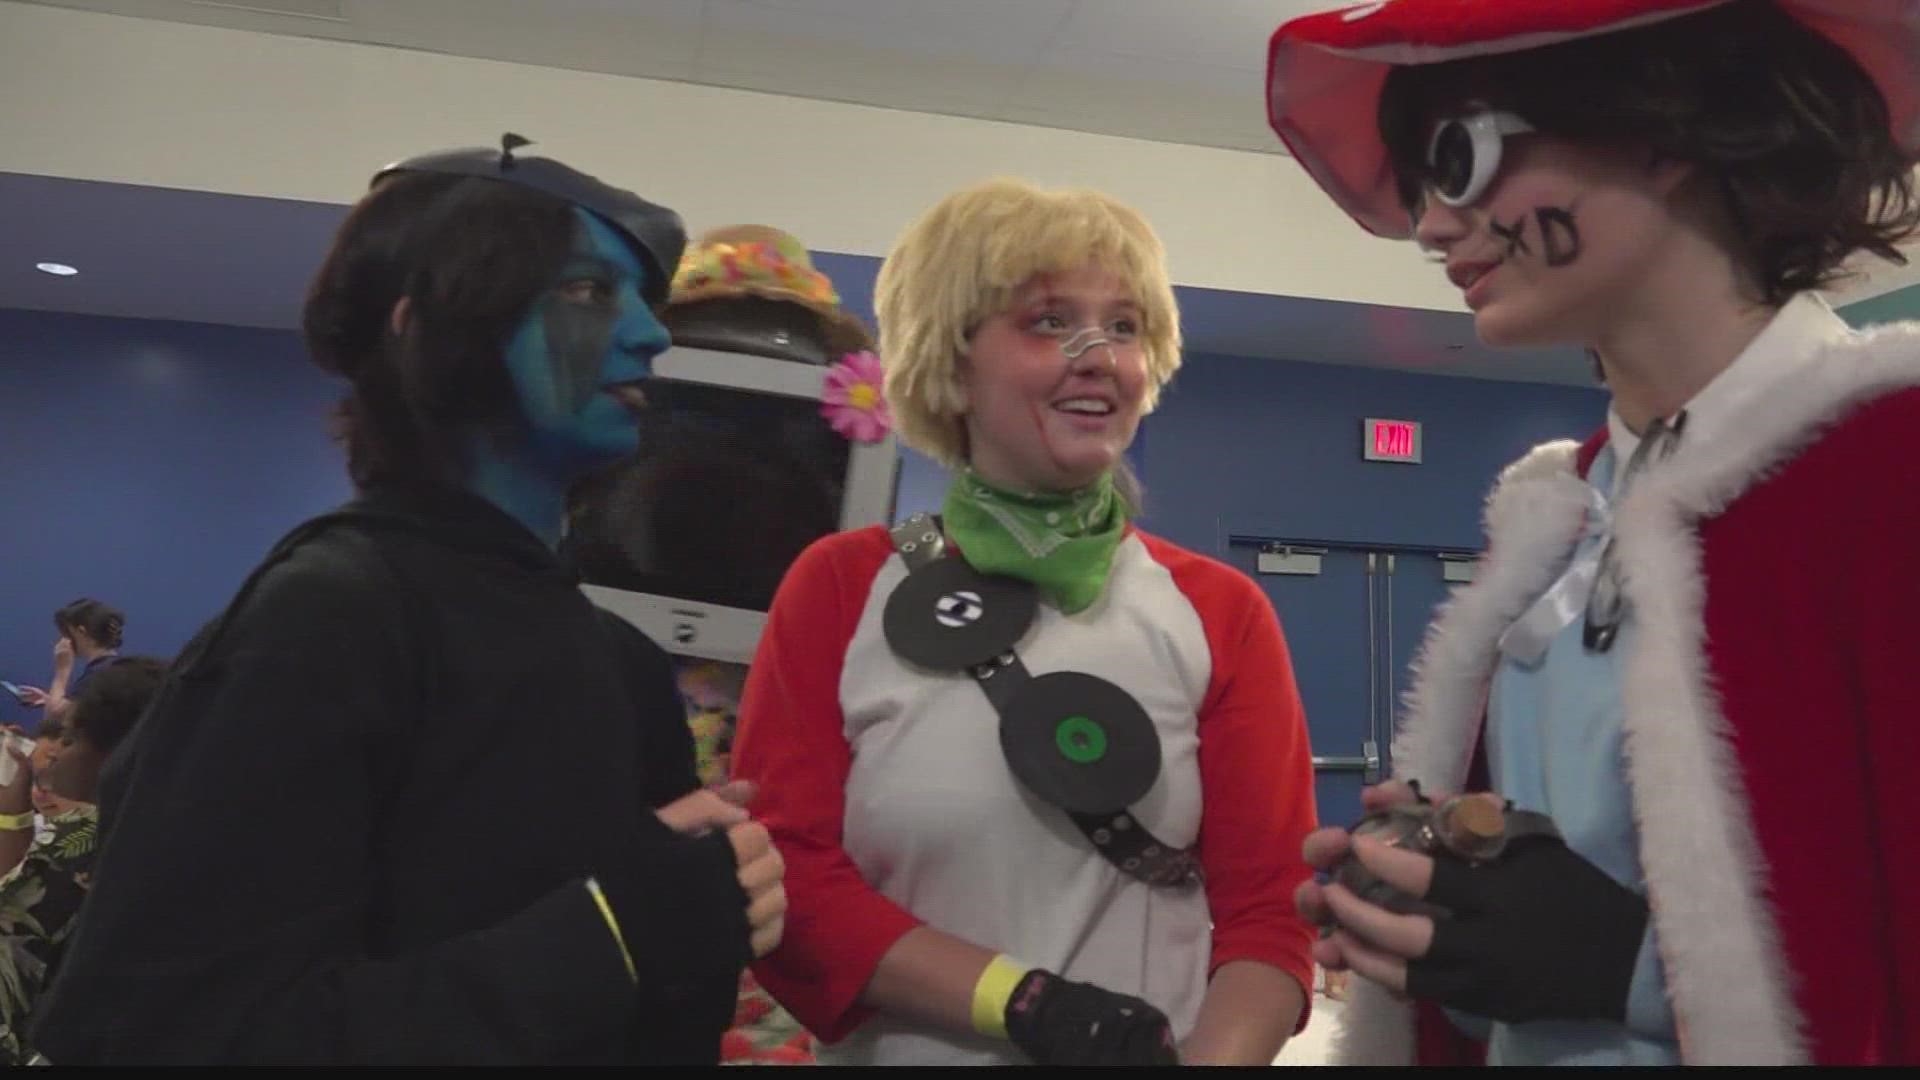 The Rocket City Anime Convention welcomes fans of Japanese animation.